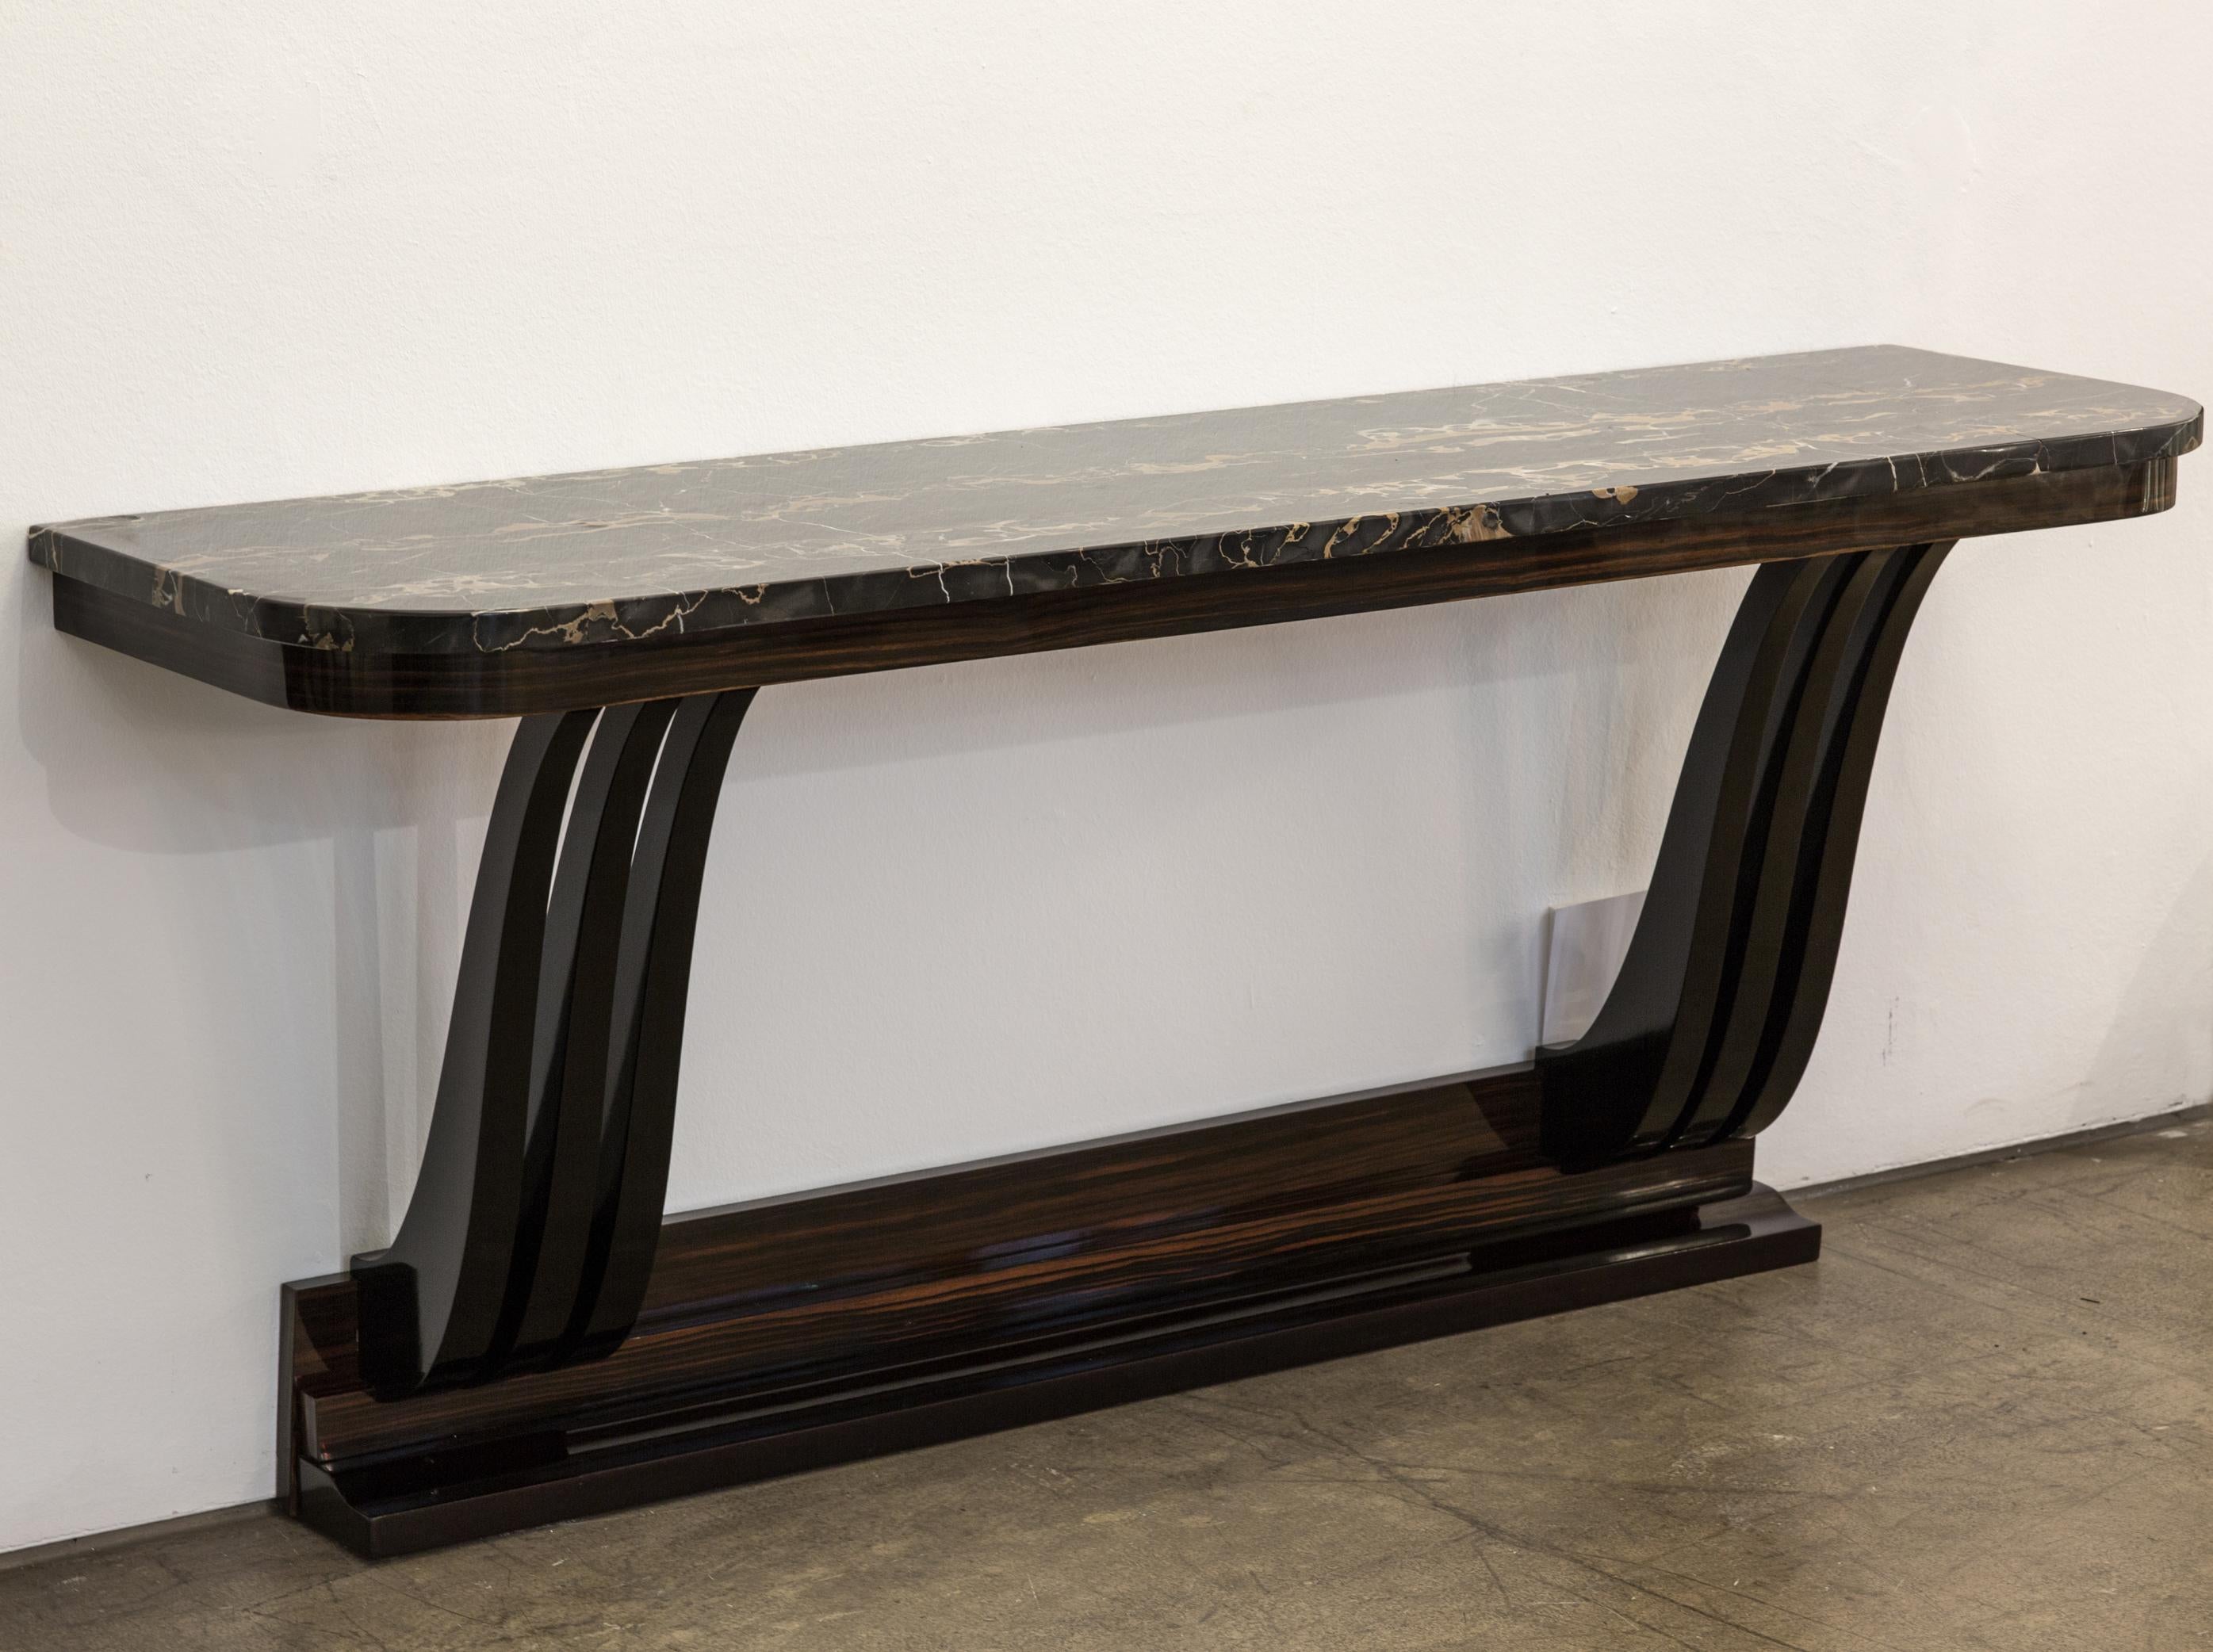 Very elegant antique French Art Deco console table from the 1930s.
The sideboard is made from ebonized polished Mahogany wood, polished Macassar wood and has an original Nero Portoro marble top. The console table has a triangle shaped Macassar